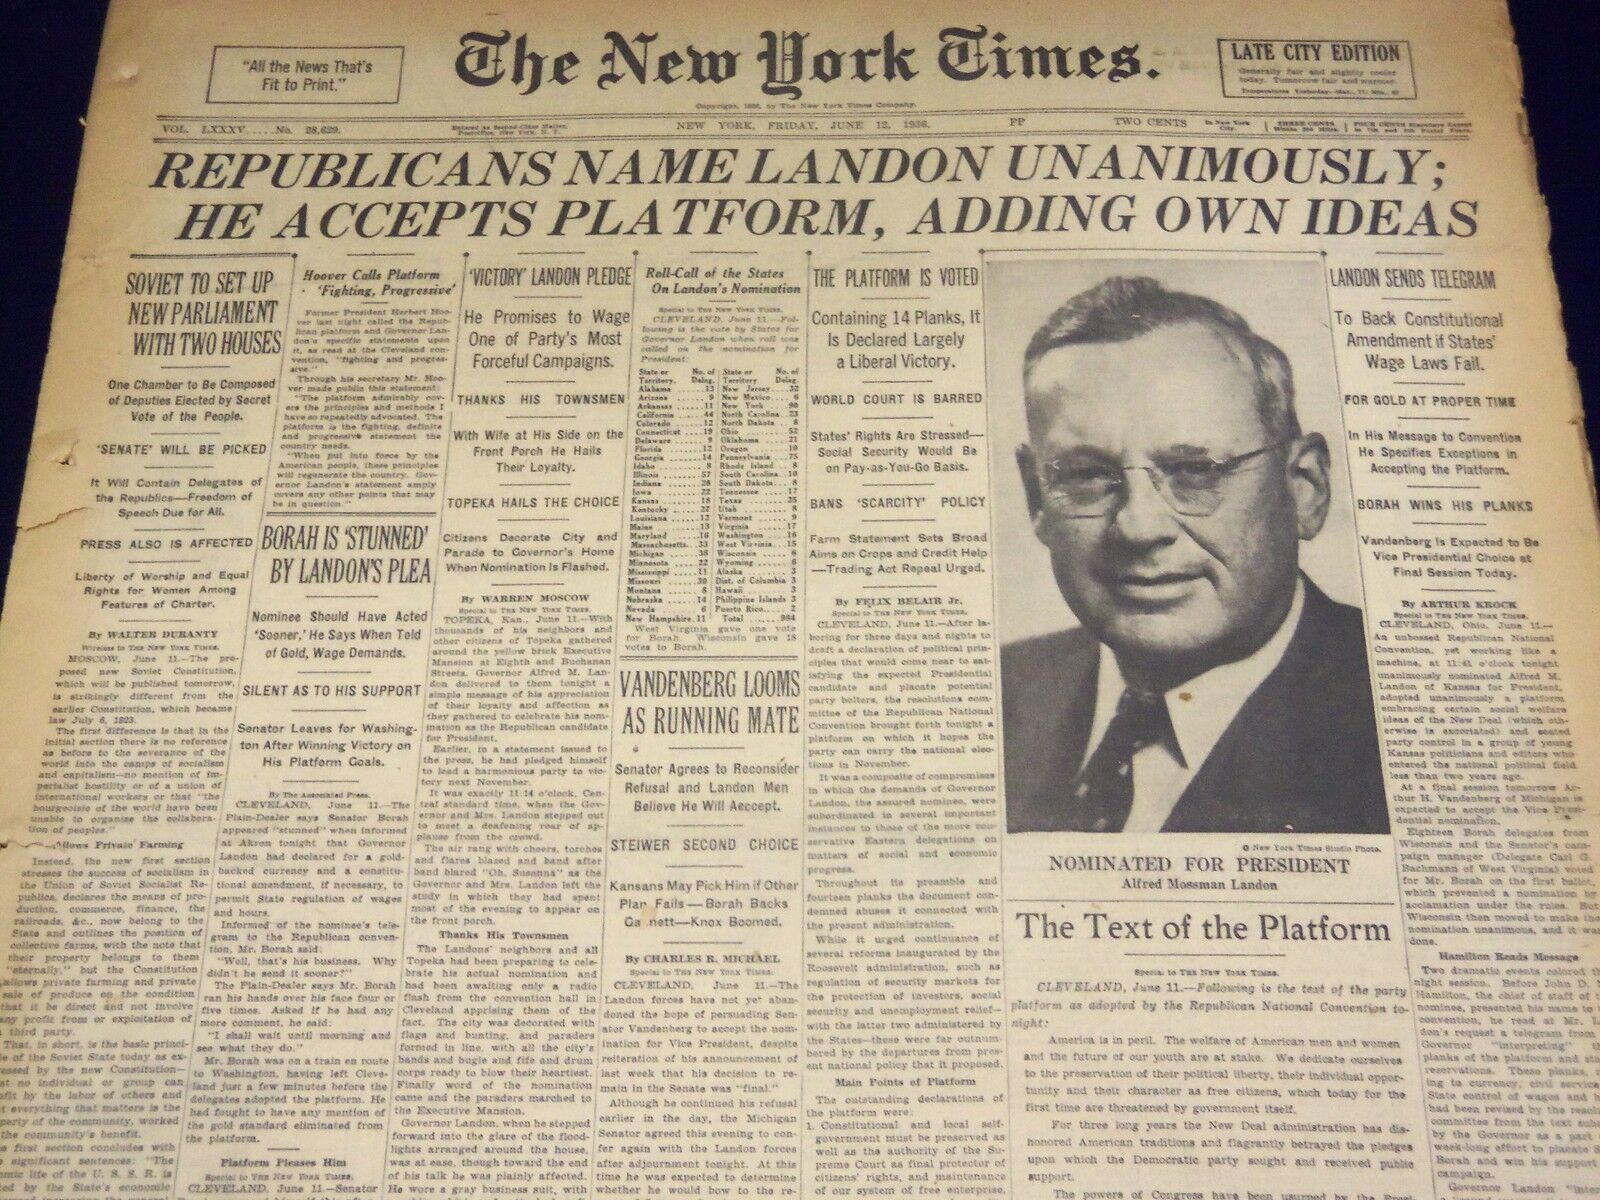 1935 JUNE 12 NEW YORK TIMES - REPUBLICANS NAME LANDON UNANIMOUSLY - NT 1936